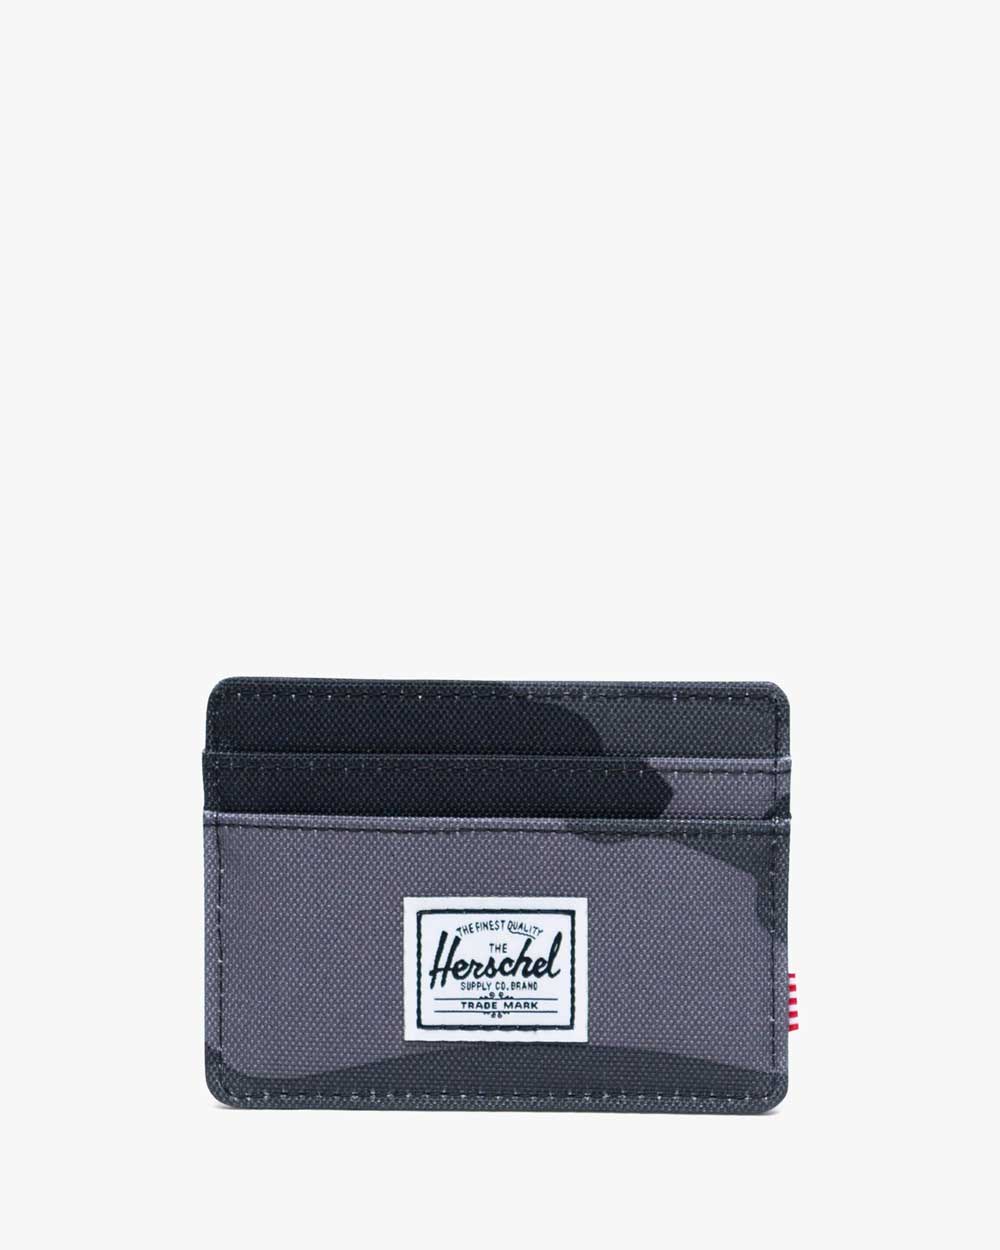 Wallets Category